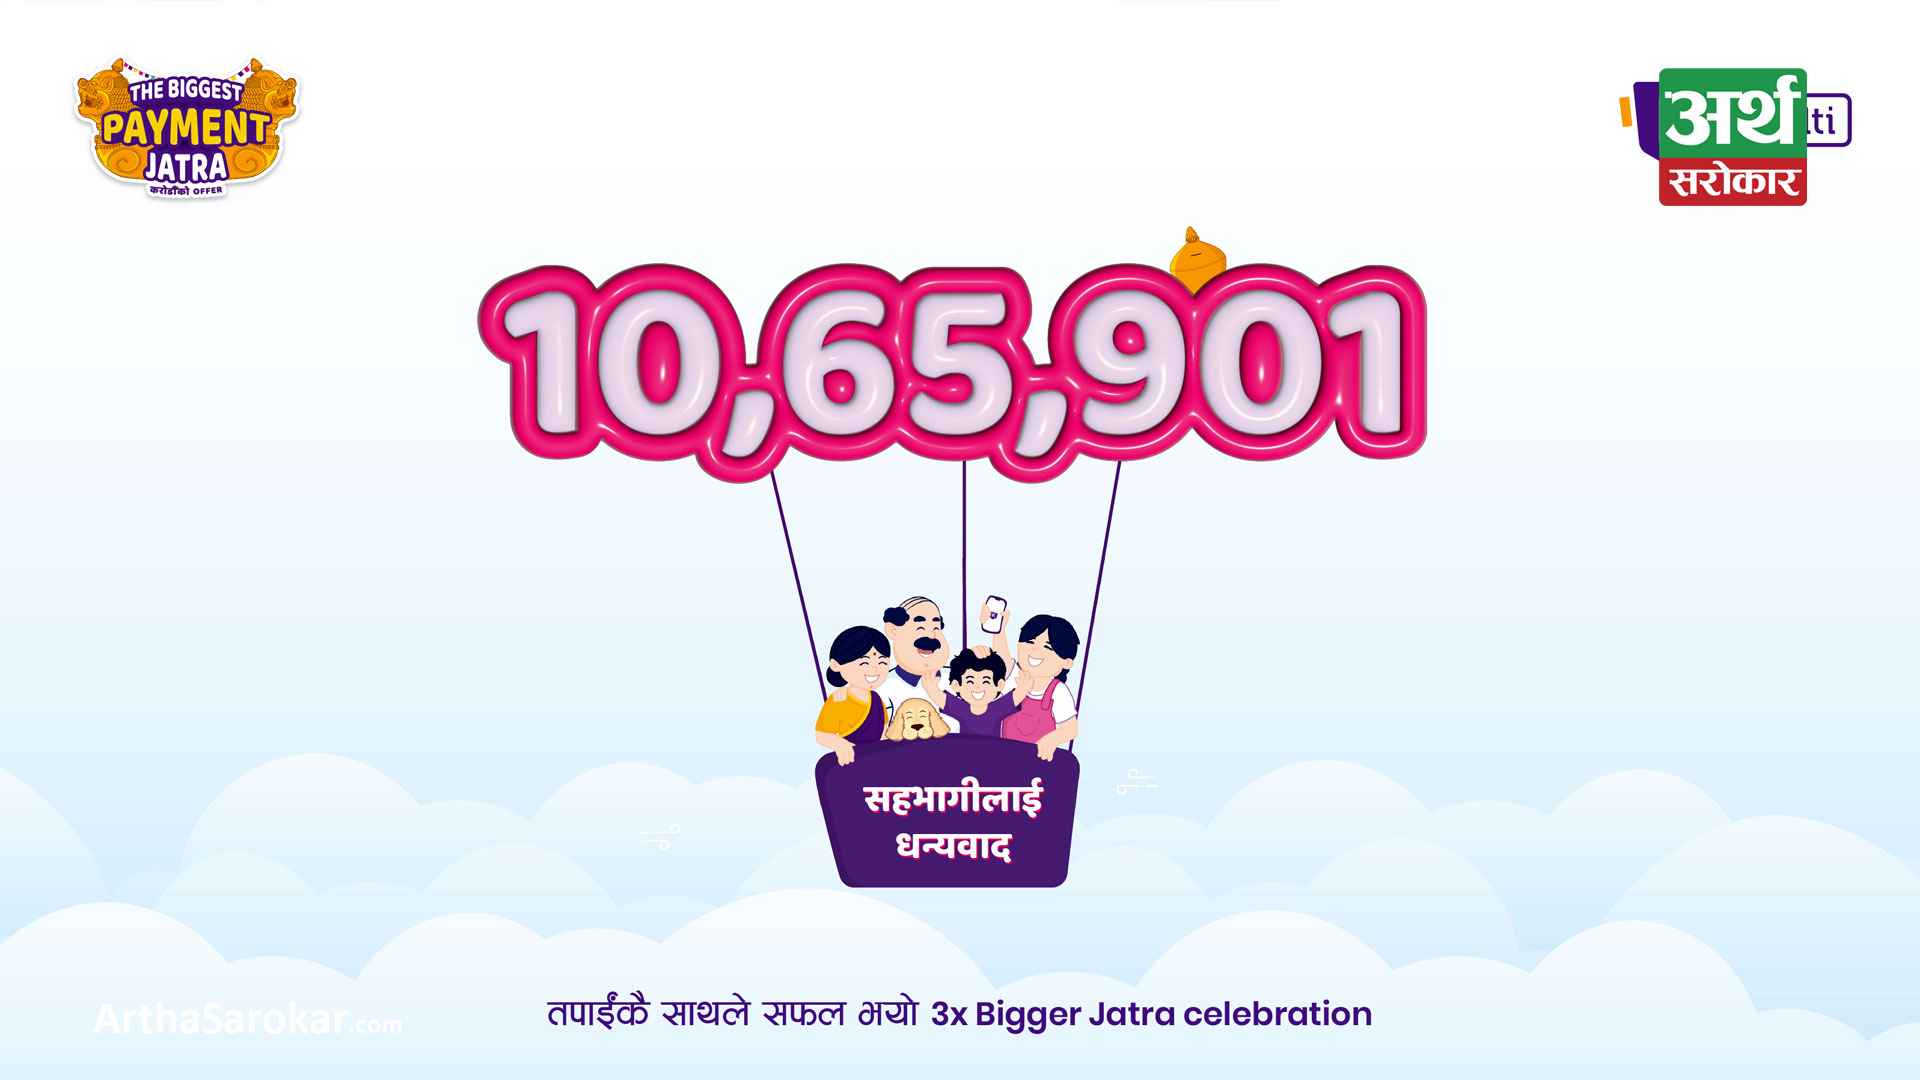 Grand Success of Khalti’s ‘The Biggest Payment Jatra’: Over 10 lakh users participated and won crores worth of prizes